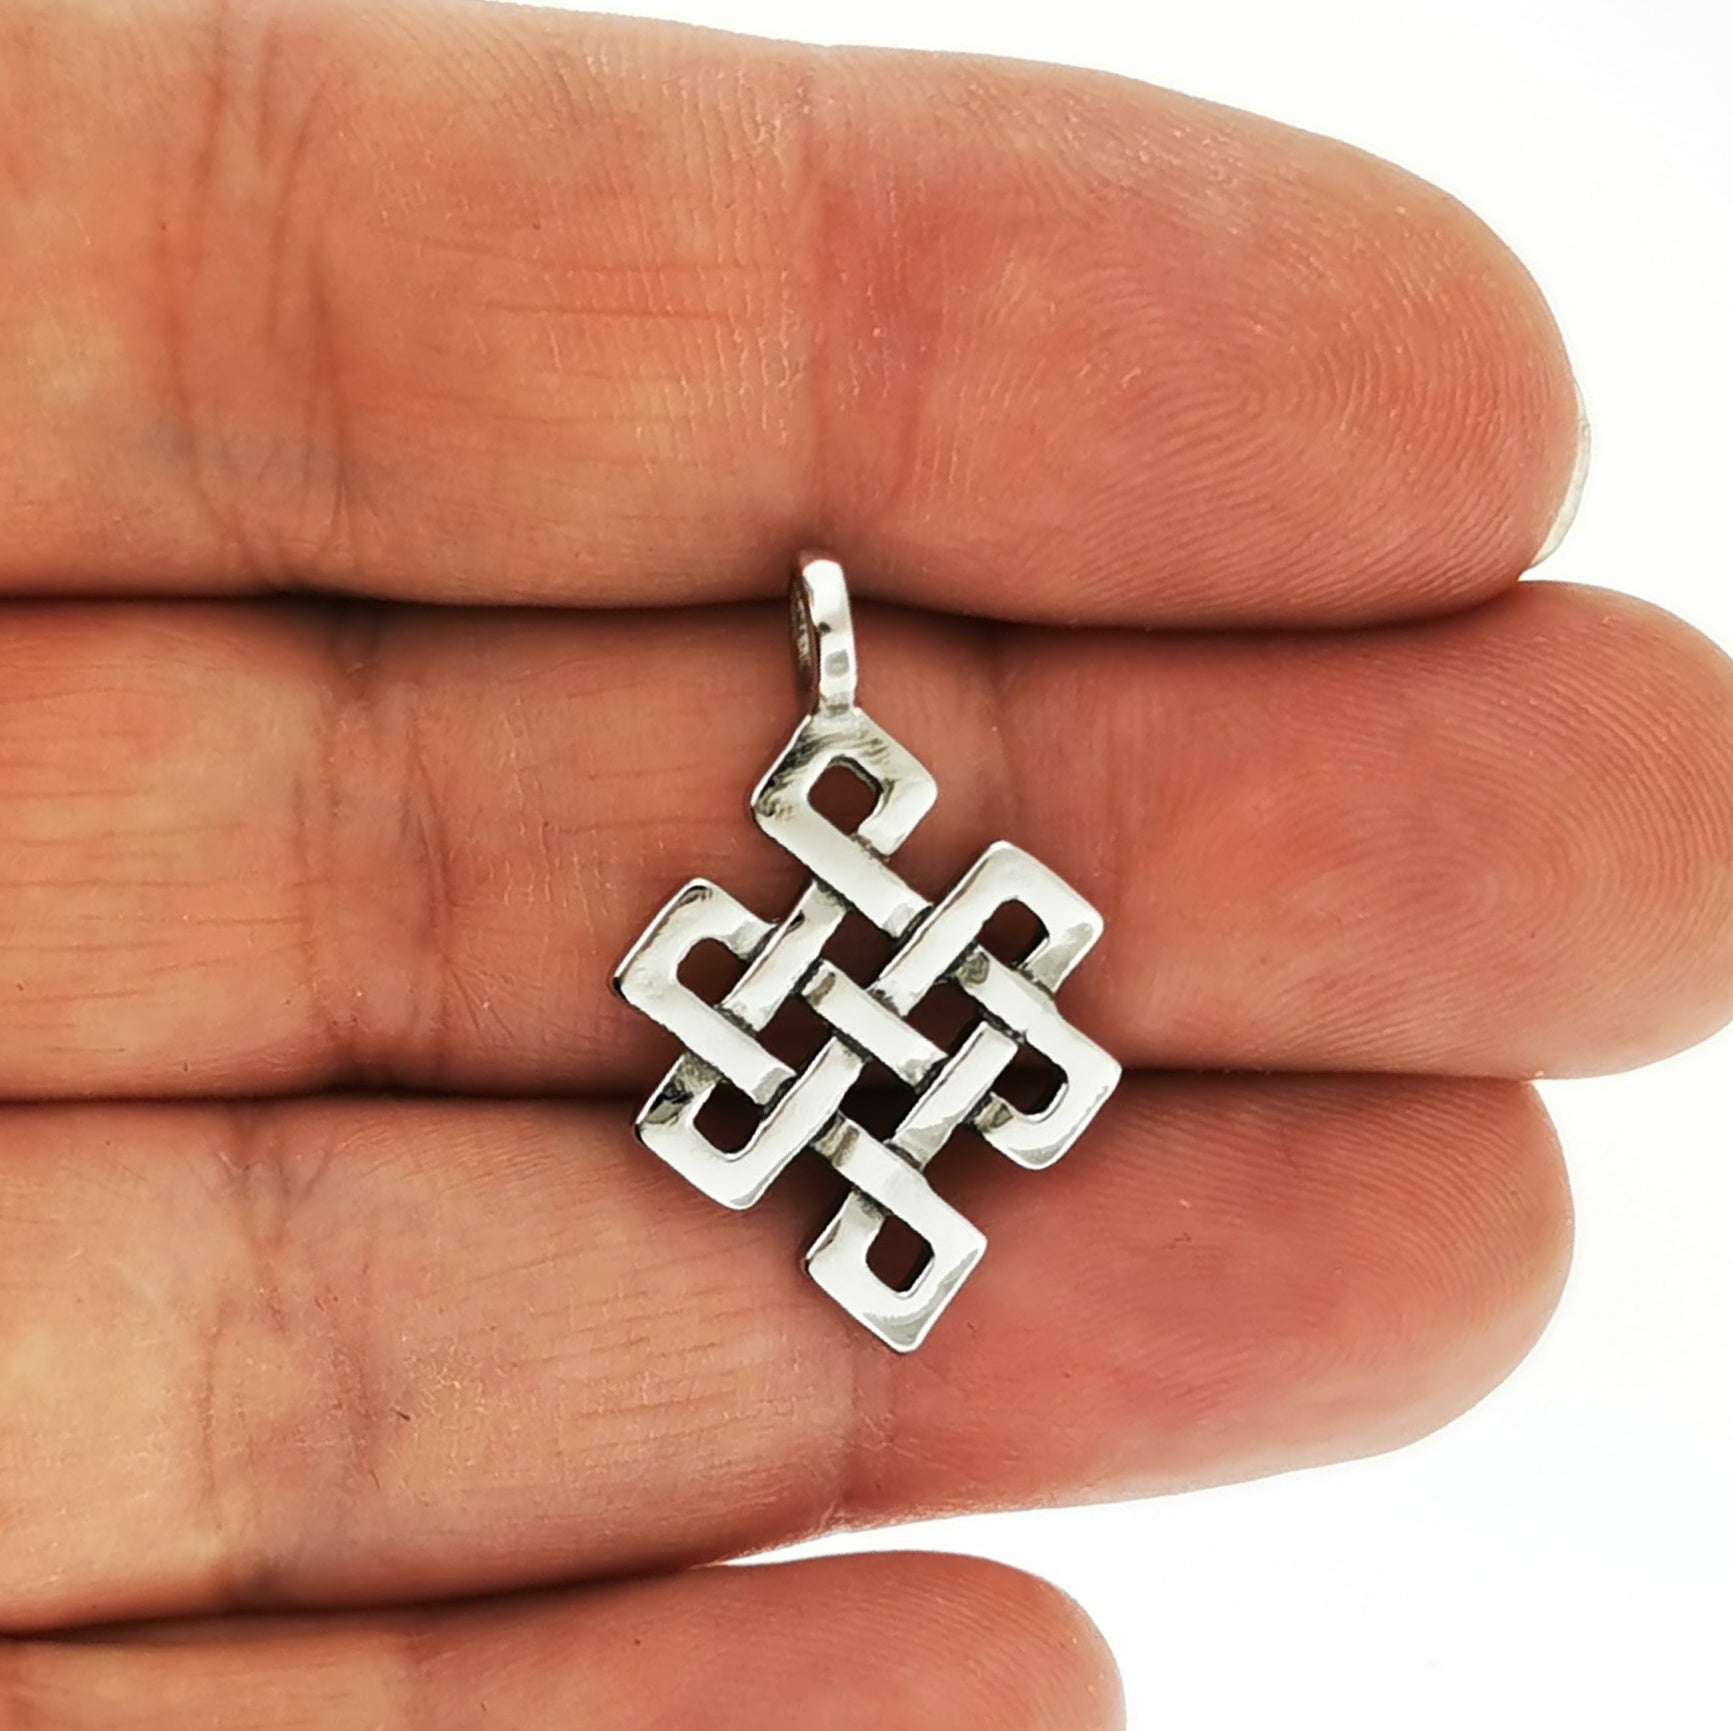 Endless Knot Pendant in Stainless Steel, Stainless Steel Knot Pendant, Steel Knot Charm, Steel Celtic Knot,  Stainless Steel Endless Knot Pendant, Celtic Knot Pendant, Steel Infinity Knot, Strainless Steel Infinity Pendant